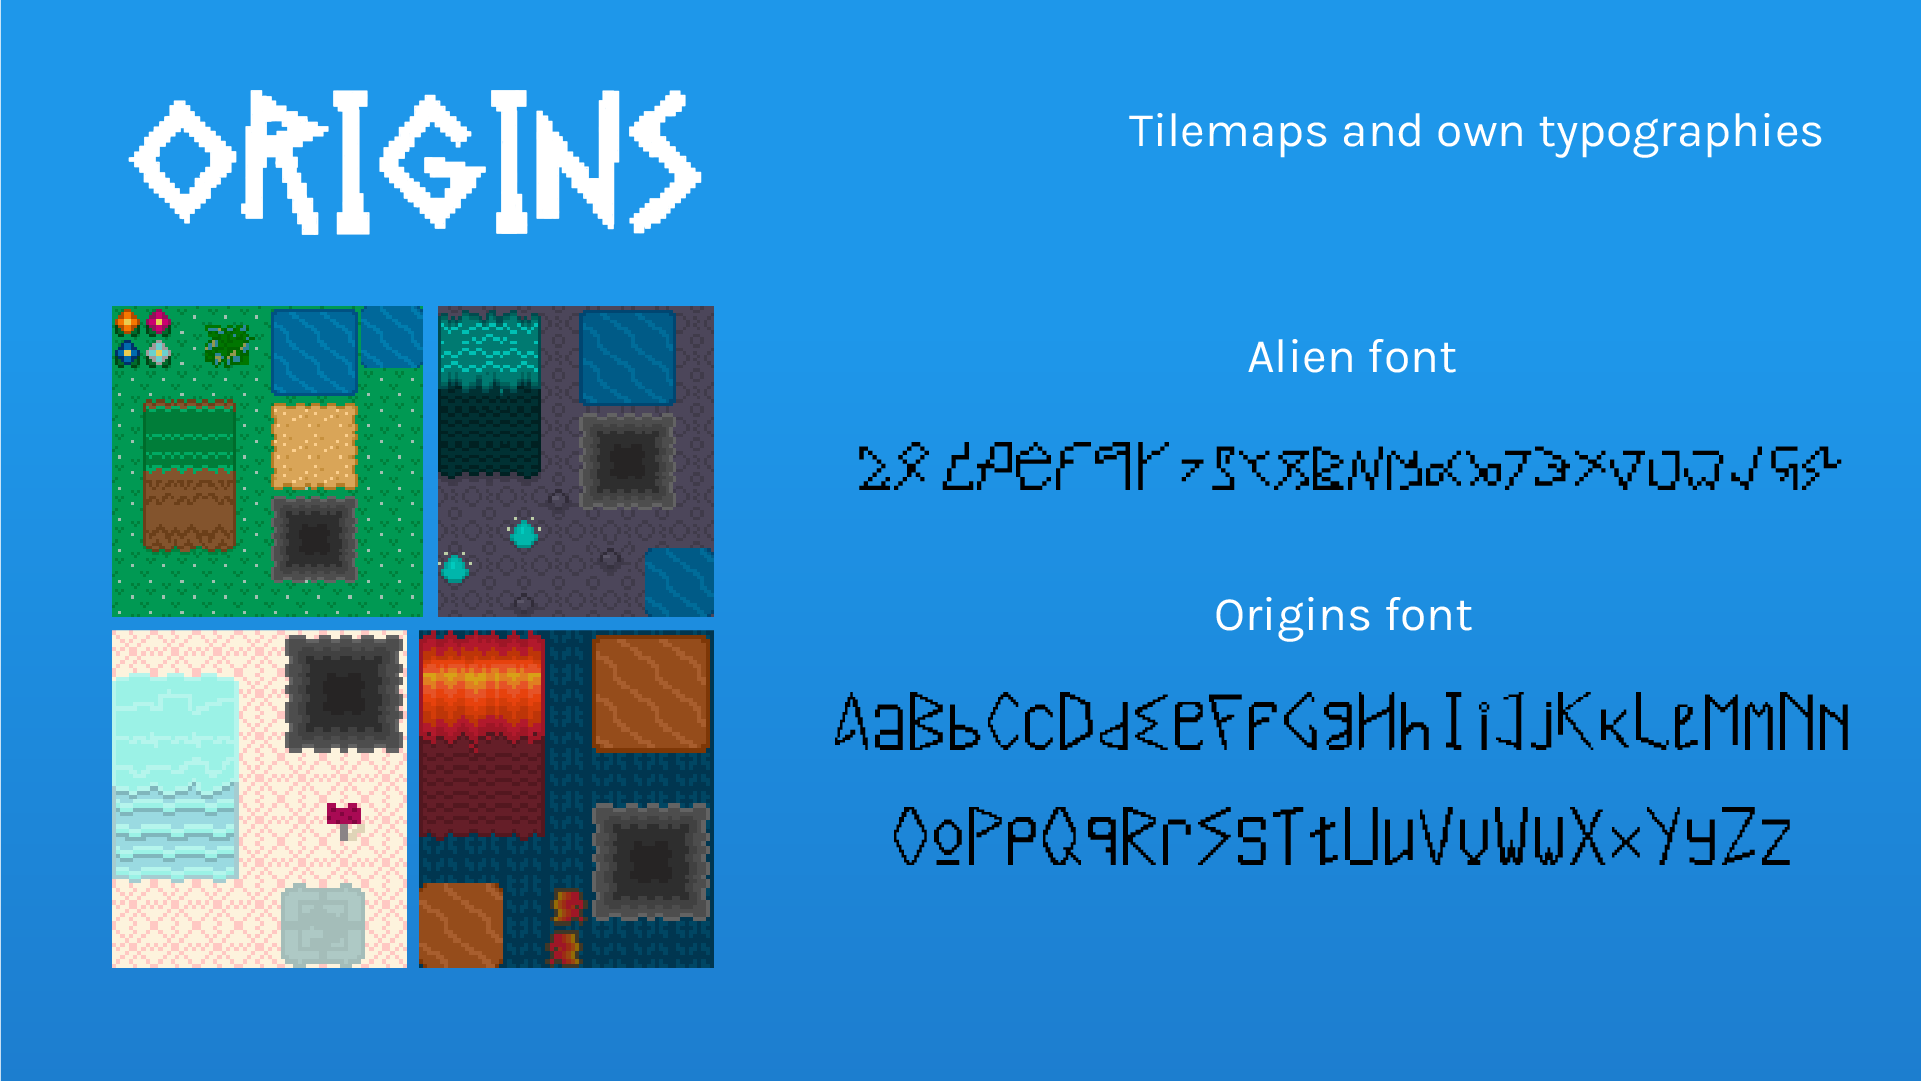 Tilemaps and self typographies